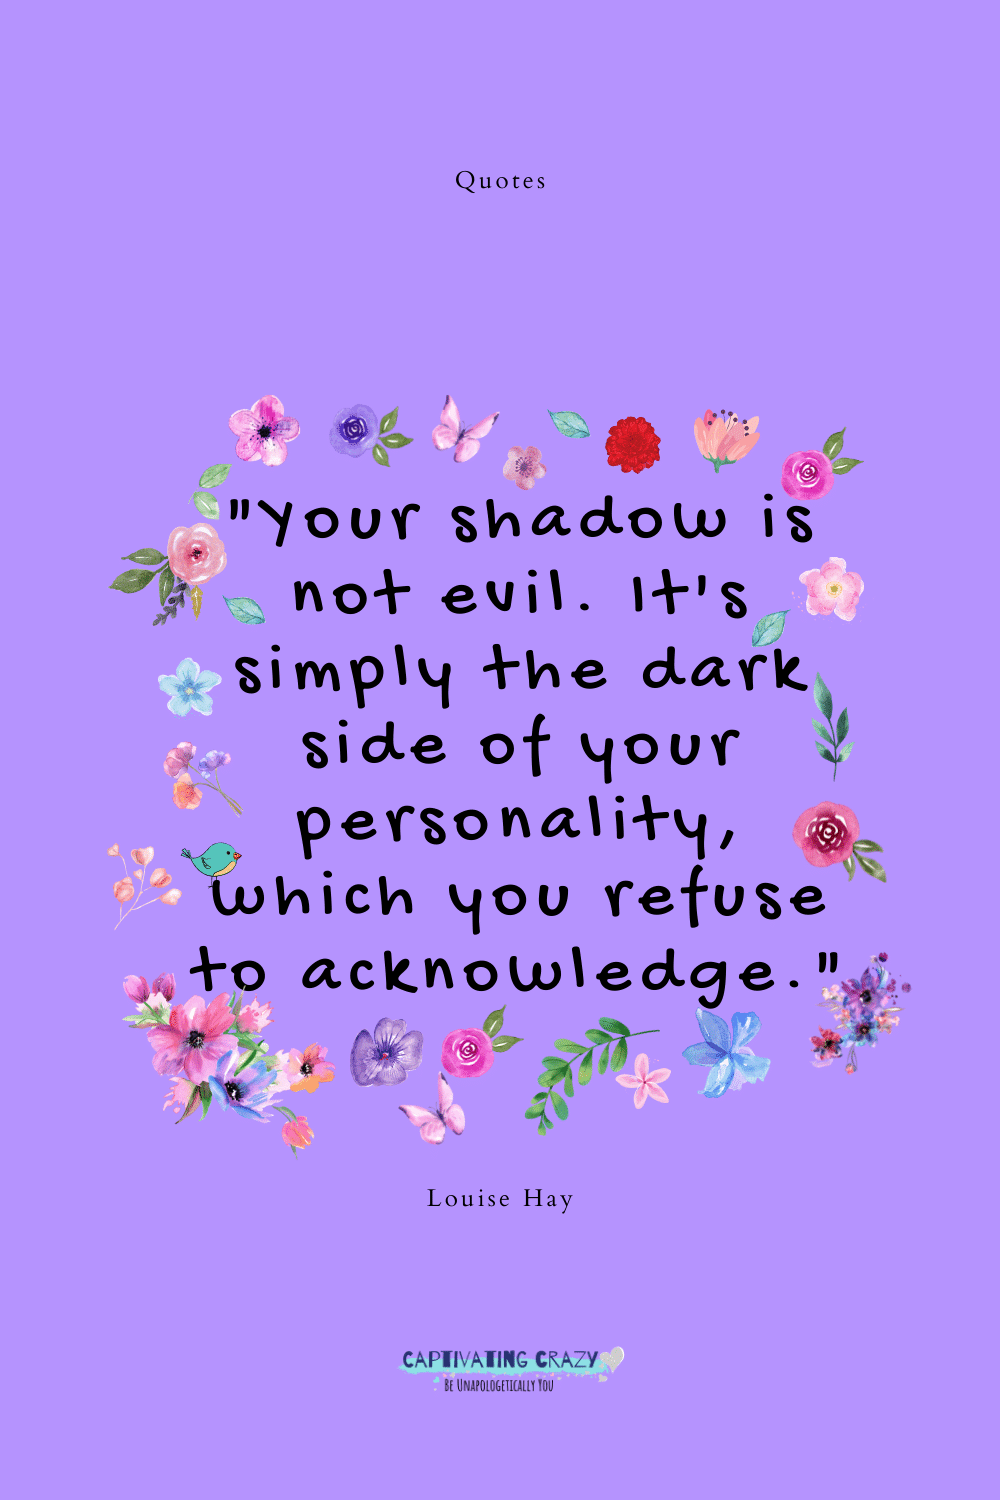 "Your shadow is not evil. It's simply the dark side of your personality, which you refuse to acknowledge." -Louise Hay